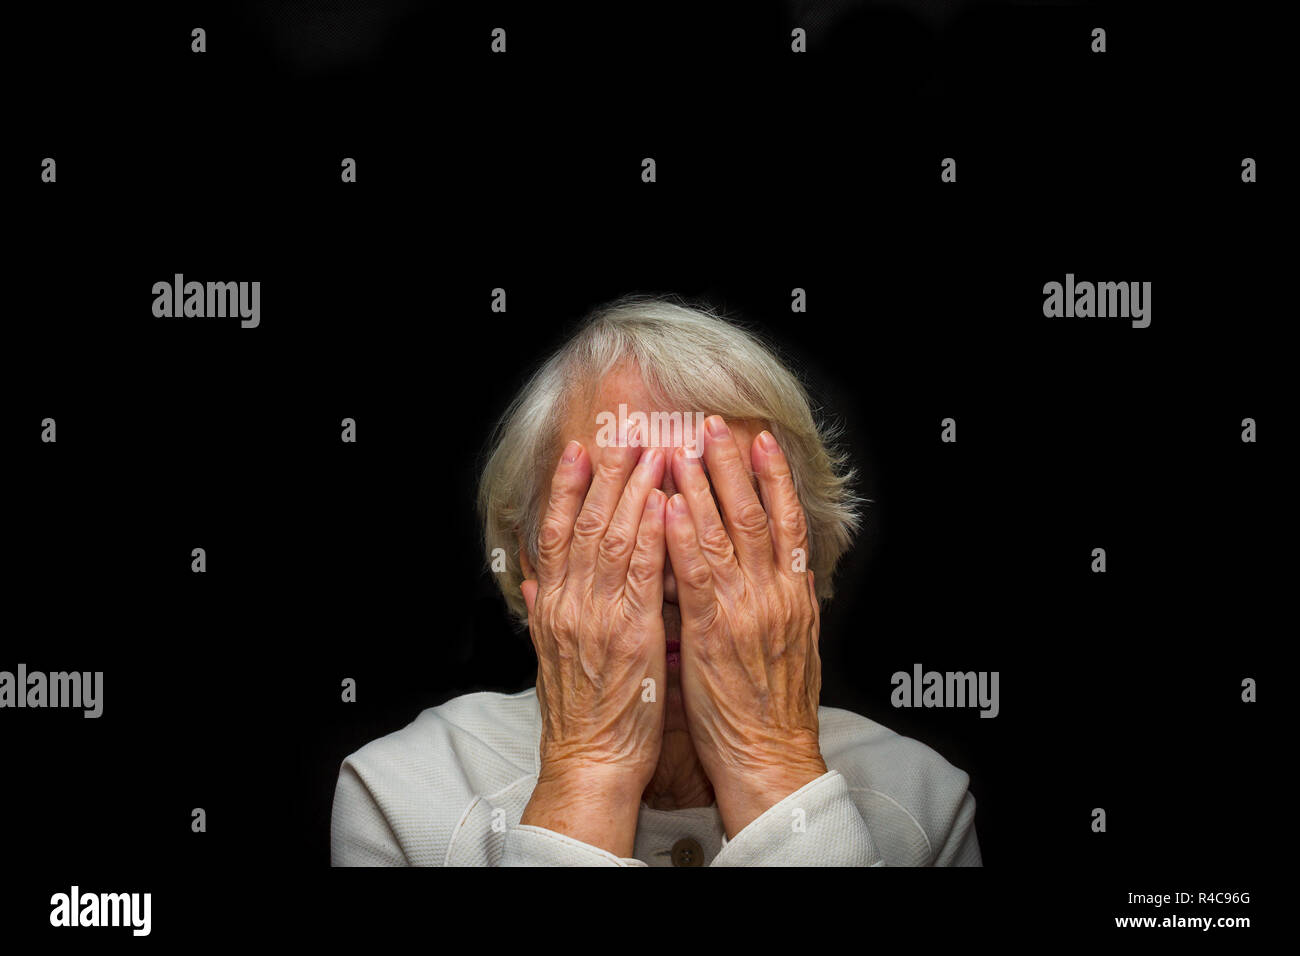 Portrait of an elderly woman with face closed by hands Stock Photo